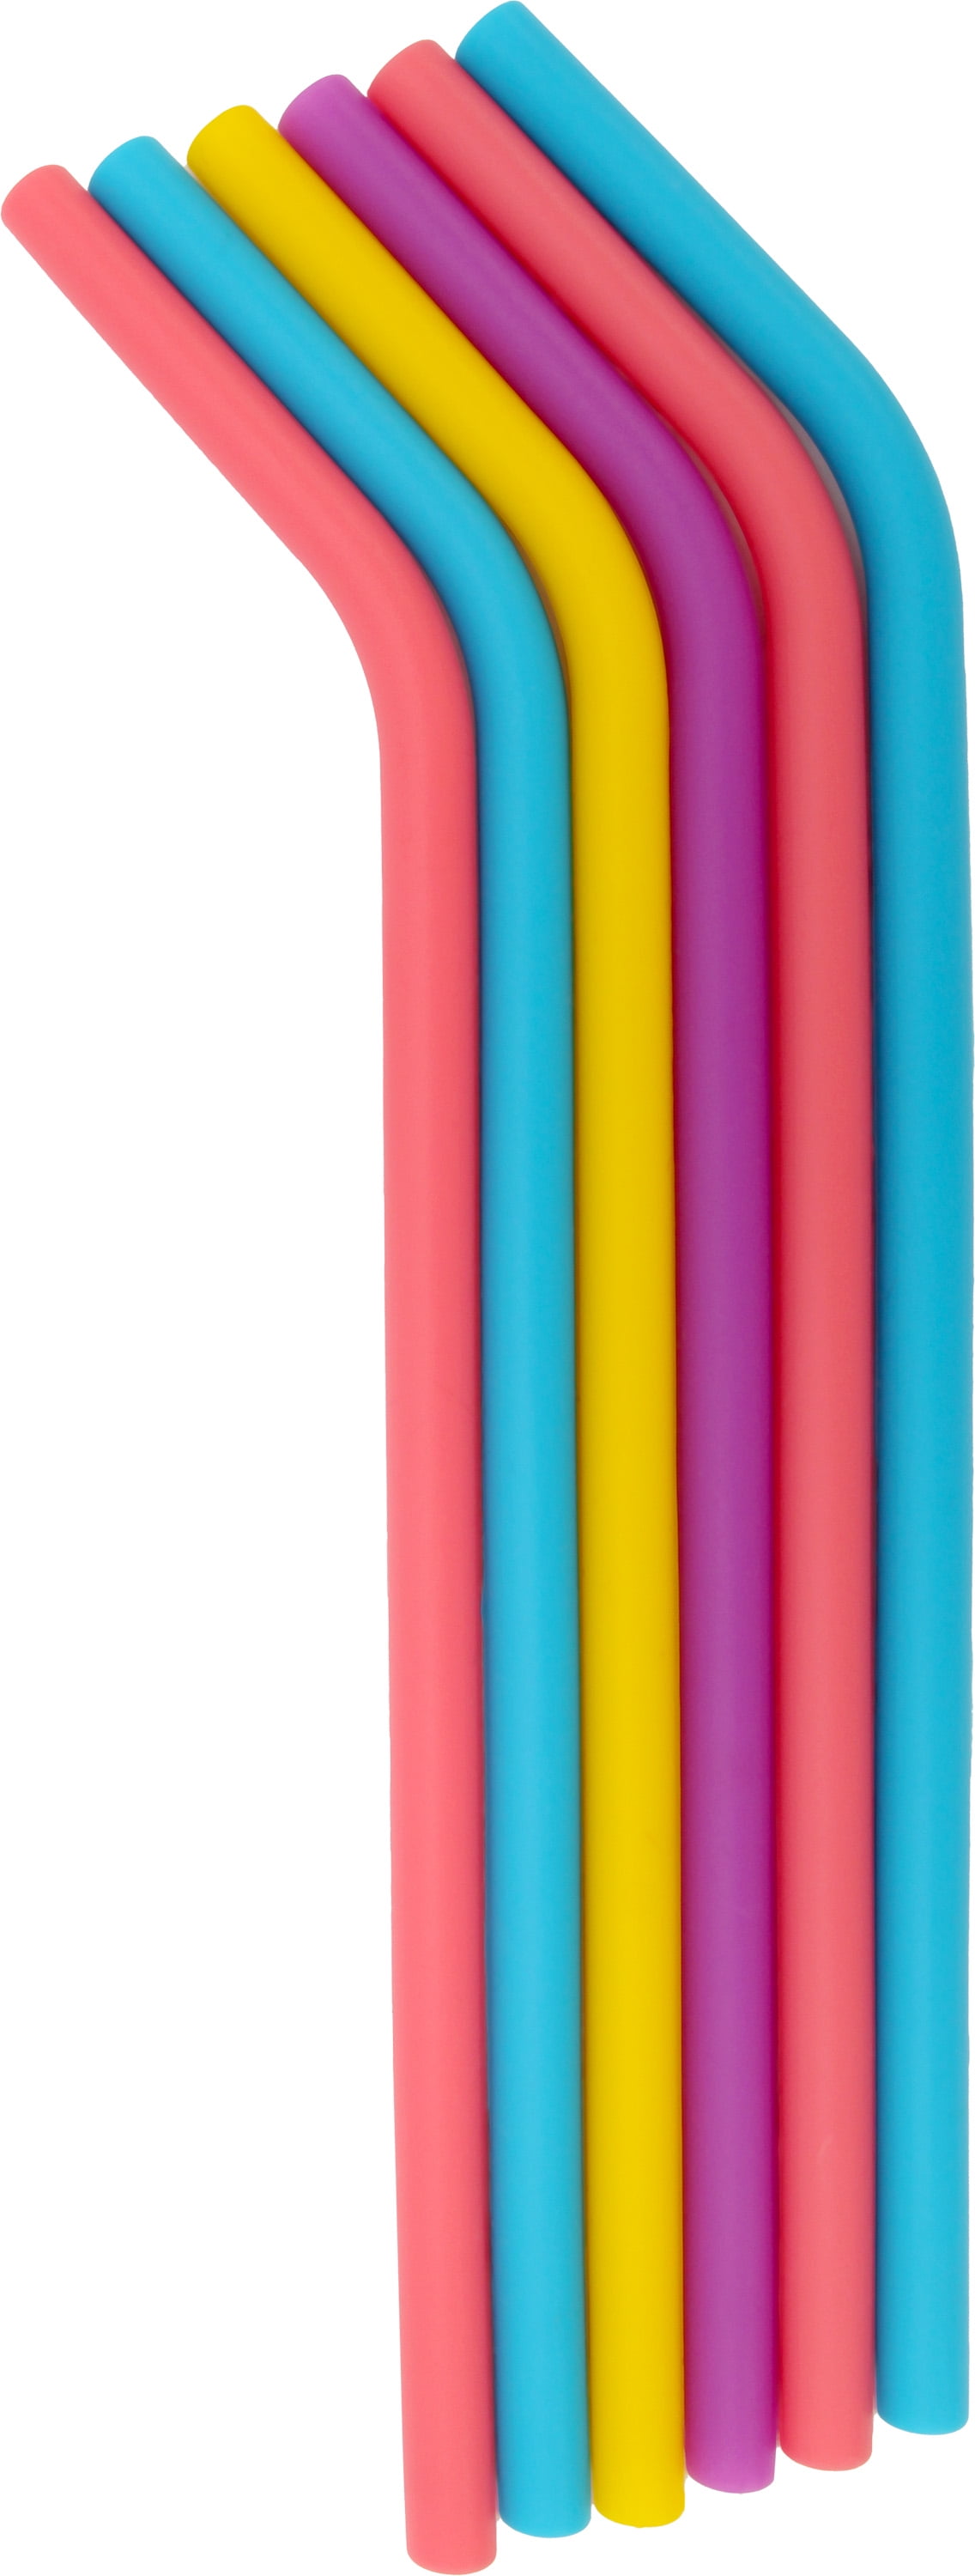 S&T INC. Reusable Silicone Straws, 6 Pack, Various Colors 